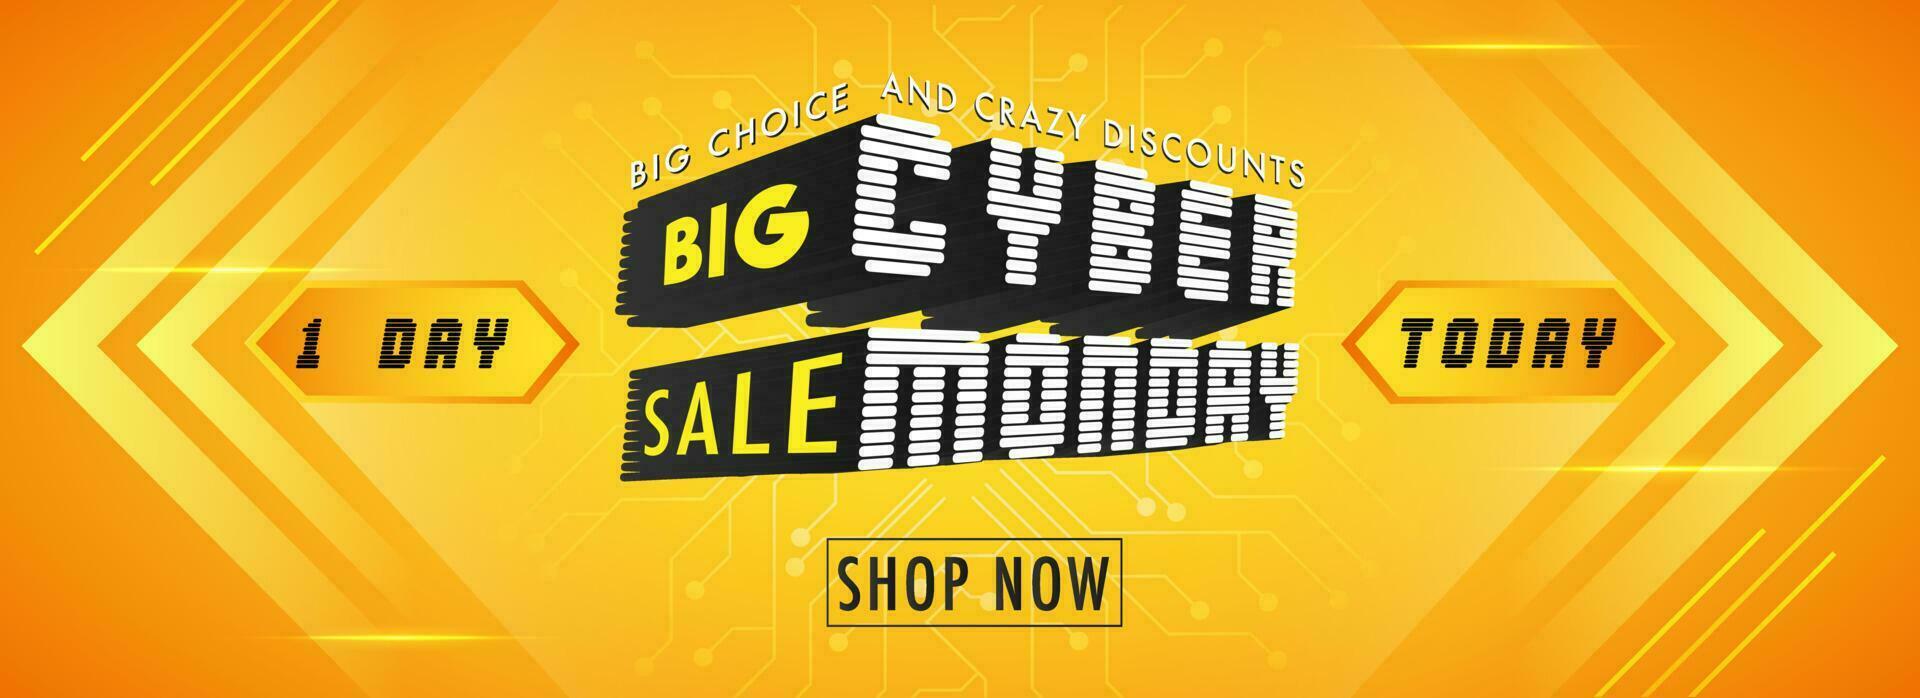 Big Sale advertising banner design with 3D creative text Cyber Monday on orange background. vector